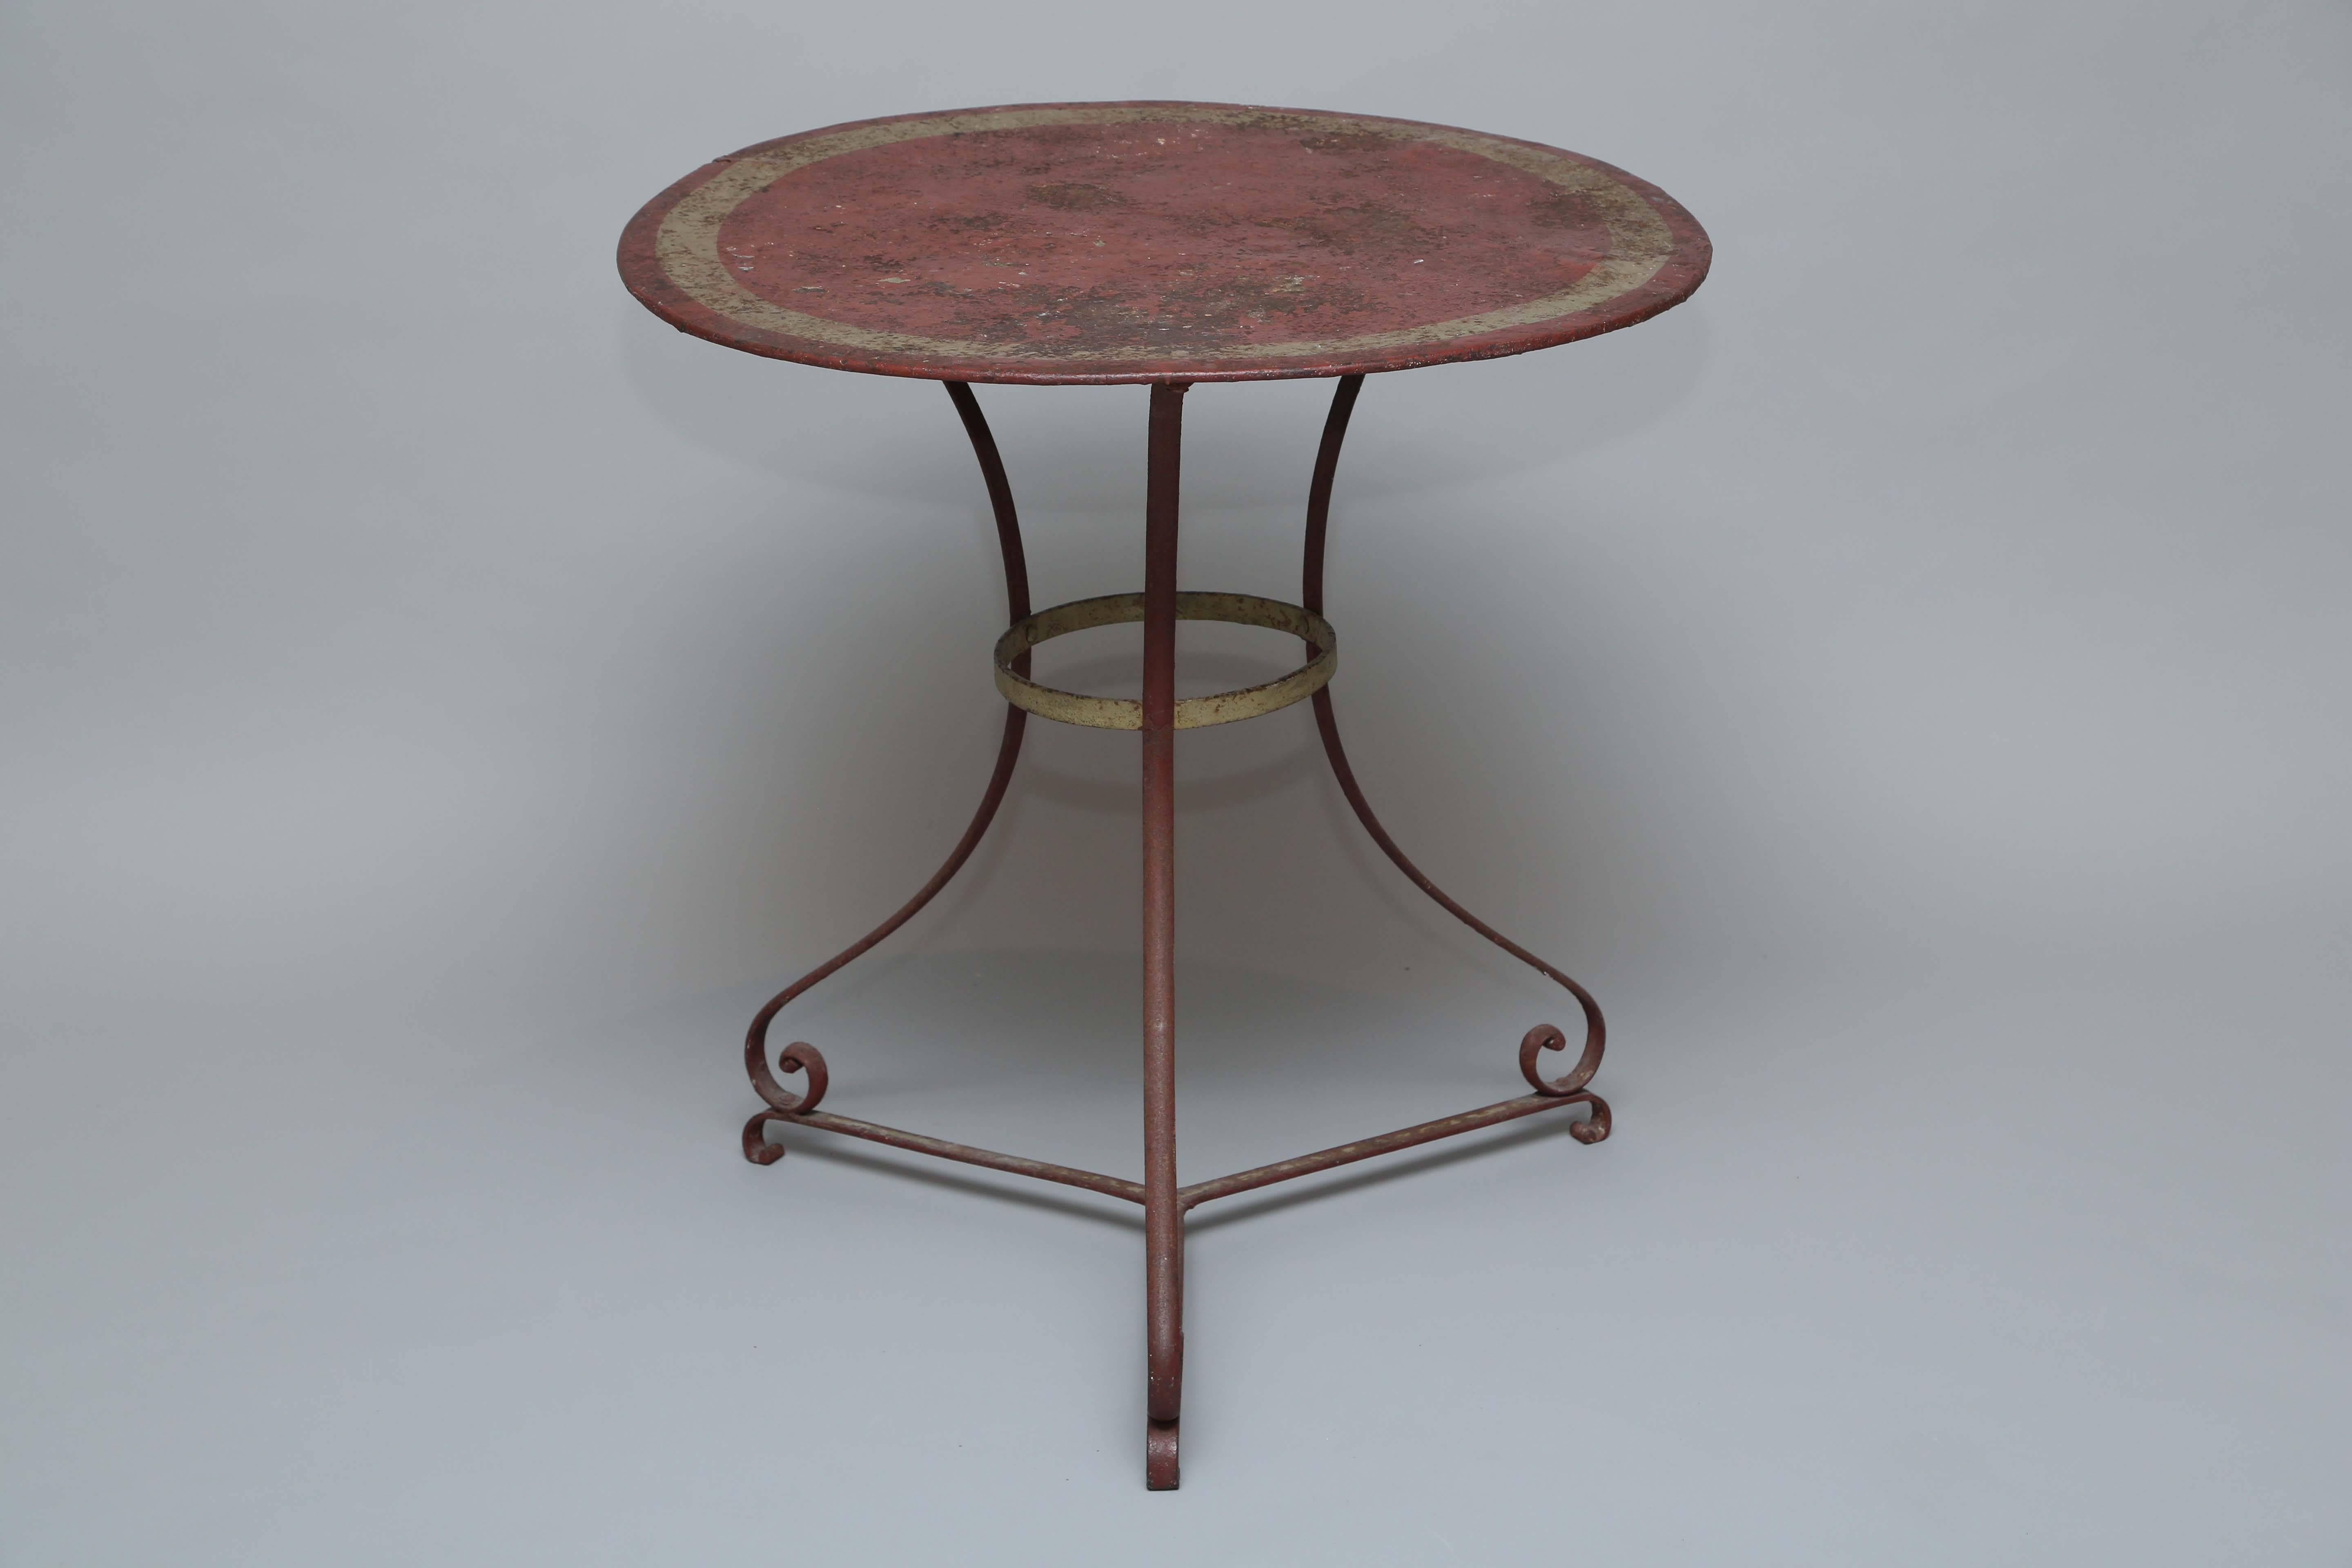 Cafe table of iron, with its original painted and parcel-gilt finish, having a round top on gueridon base of three curved legs, ending in scroll feet and joined by a ring central stretcher.

Stock ID: D9367